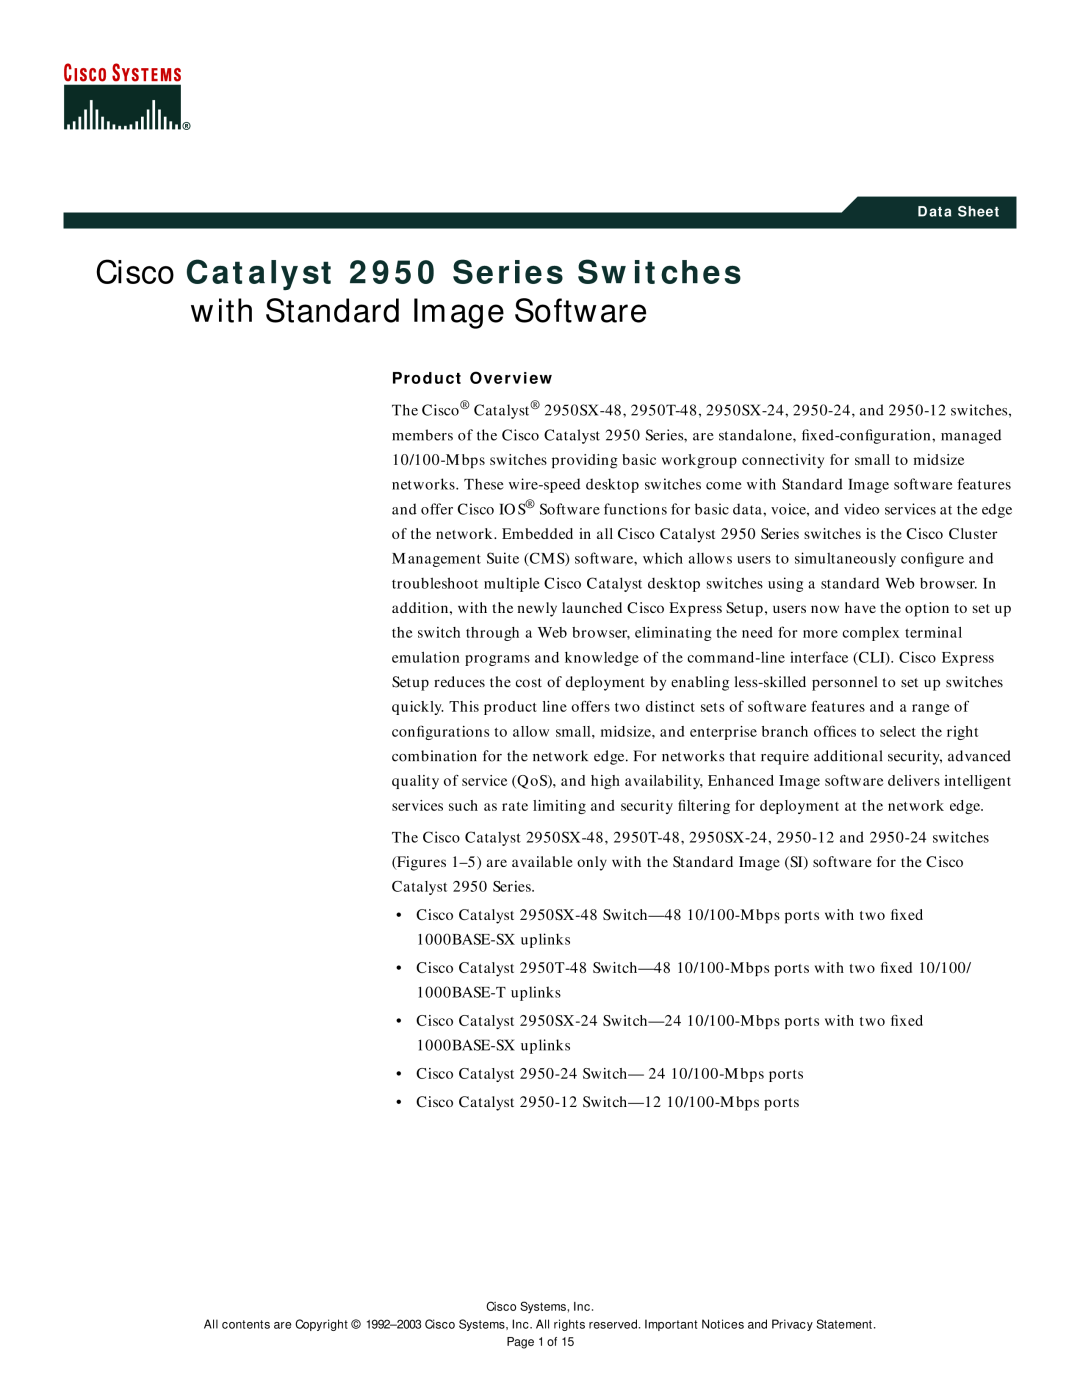 Cisco Systems 2950SX-24 manual Product Overview, Cisco Catalyst 2950 Series Switches, with Standard Image Software 